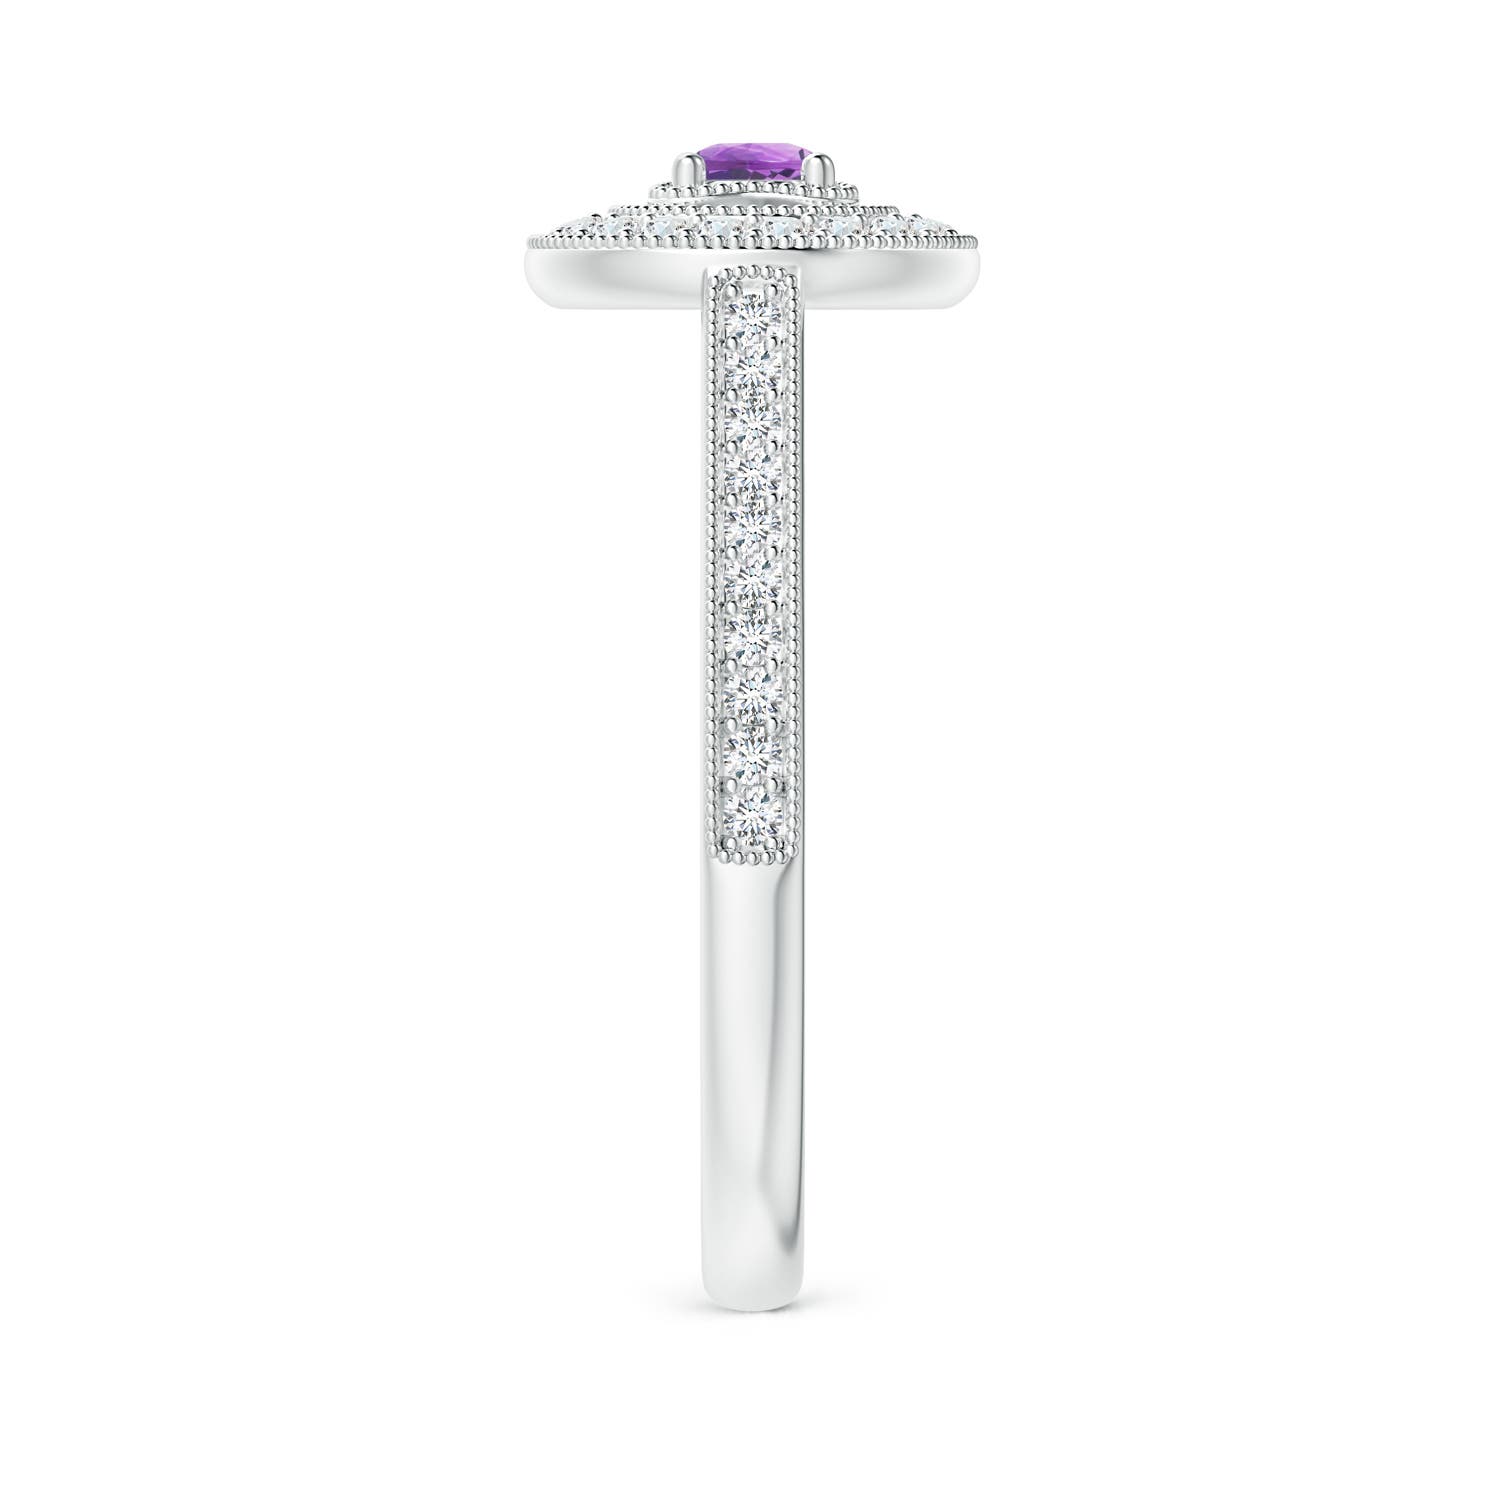 A - Amethyst / 0.46 CT / 14 KT White Gold